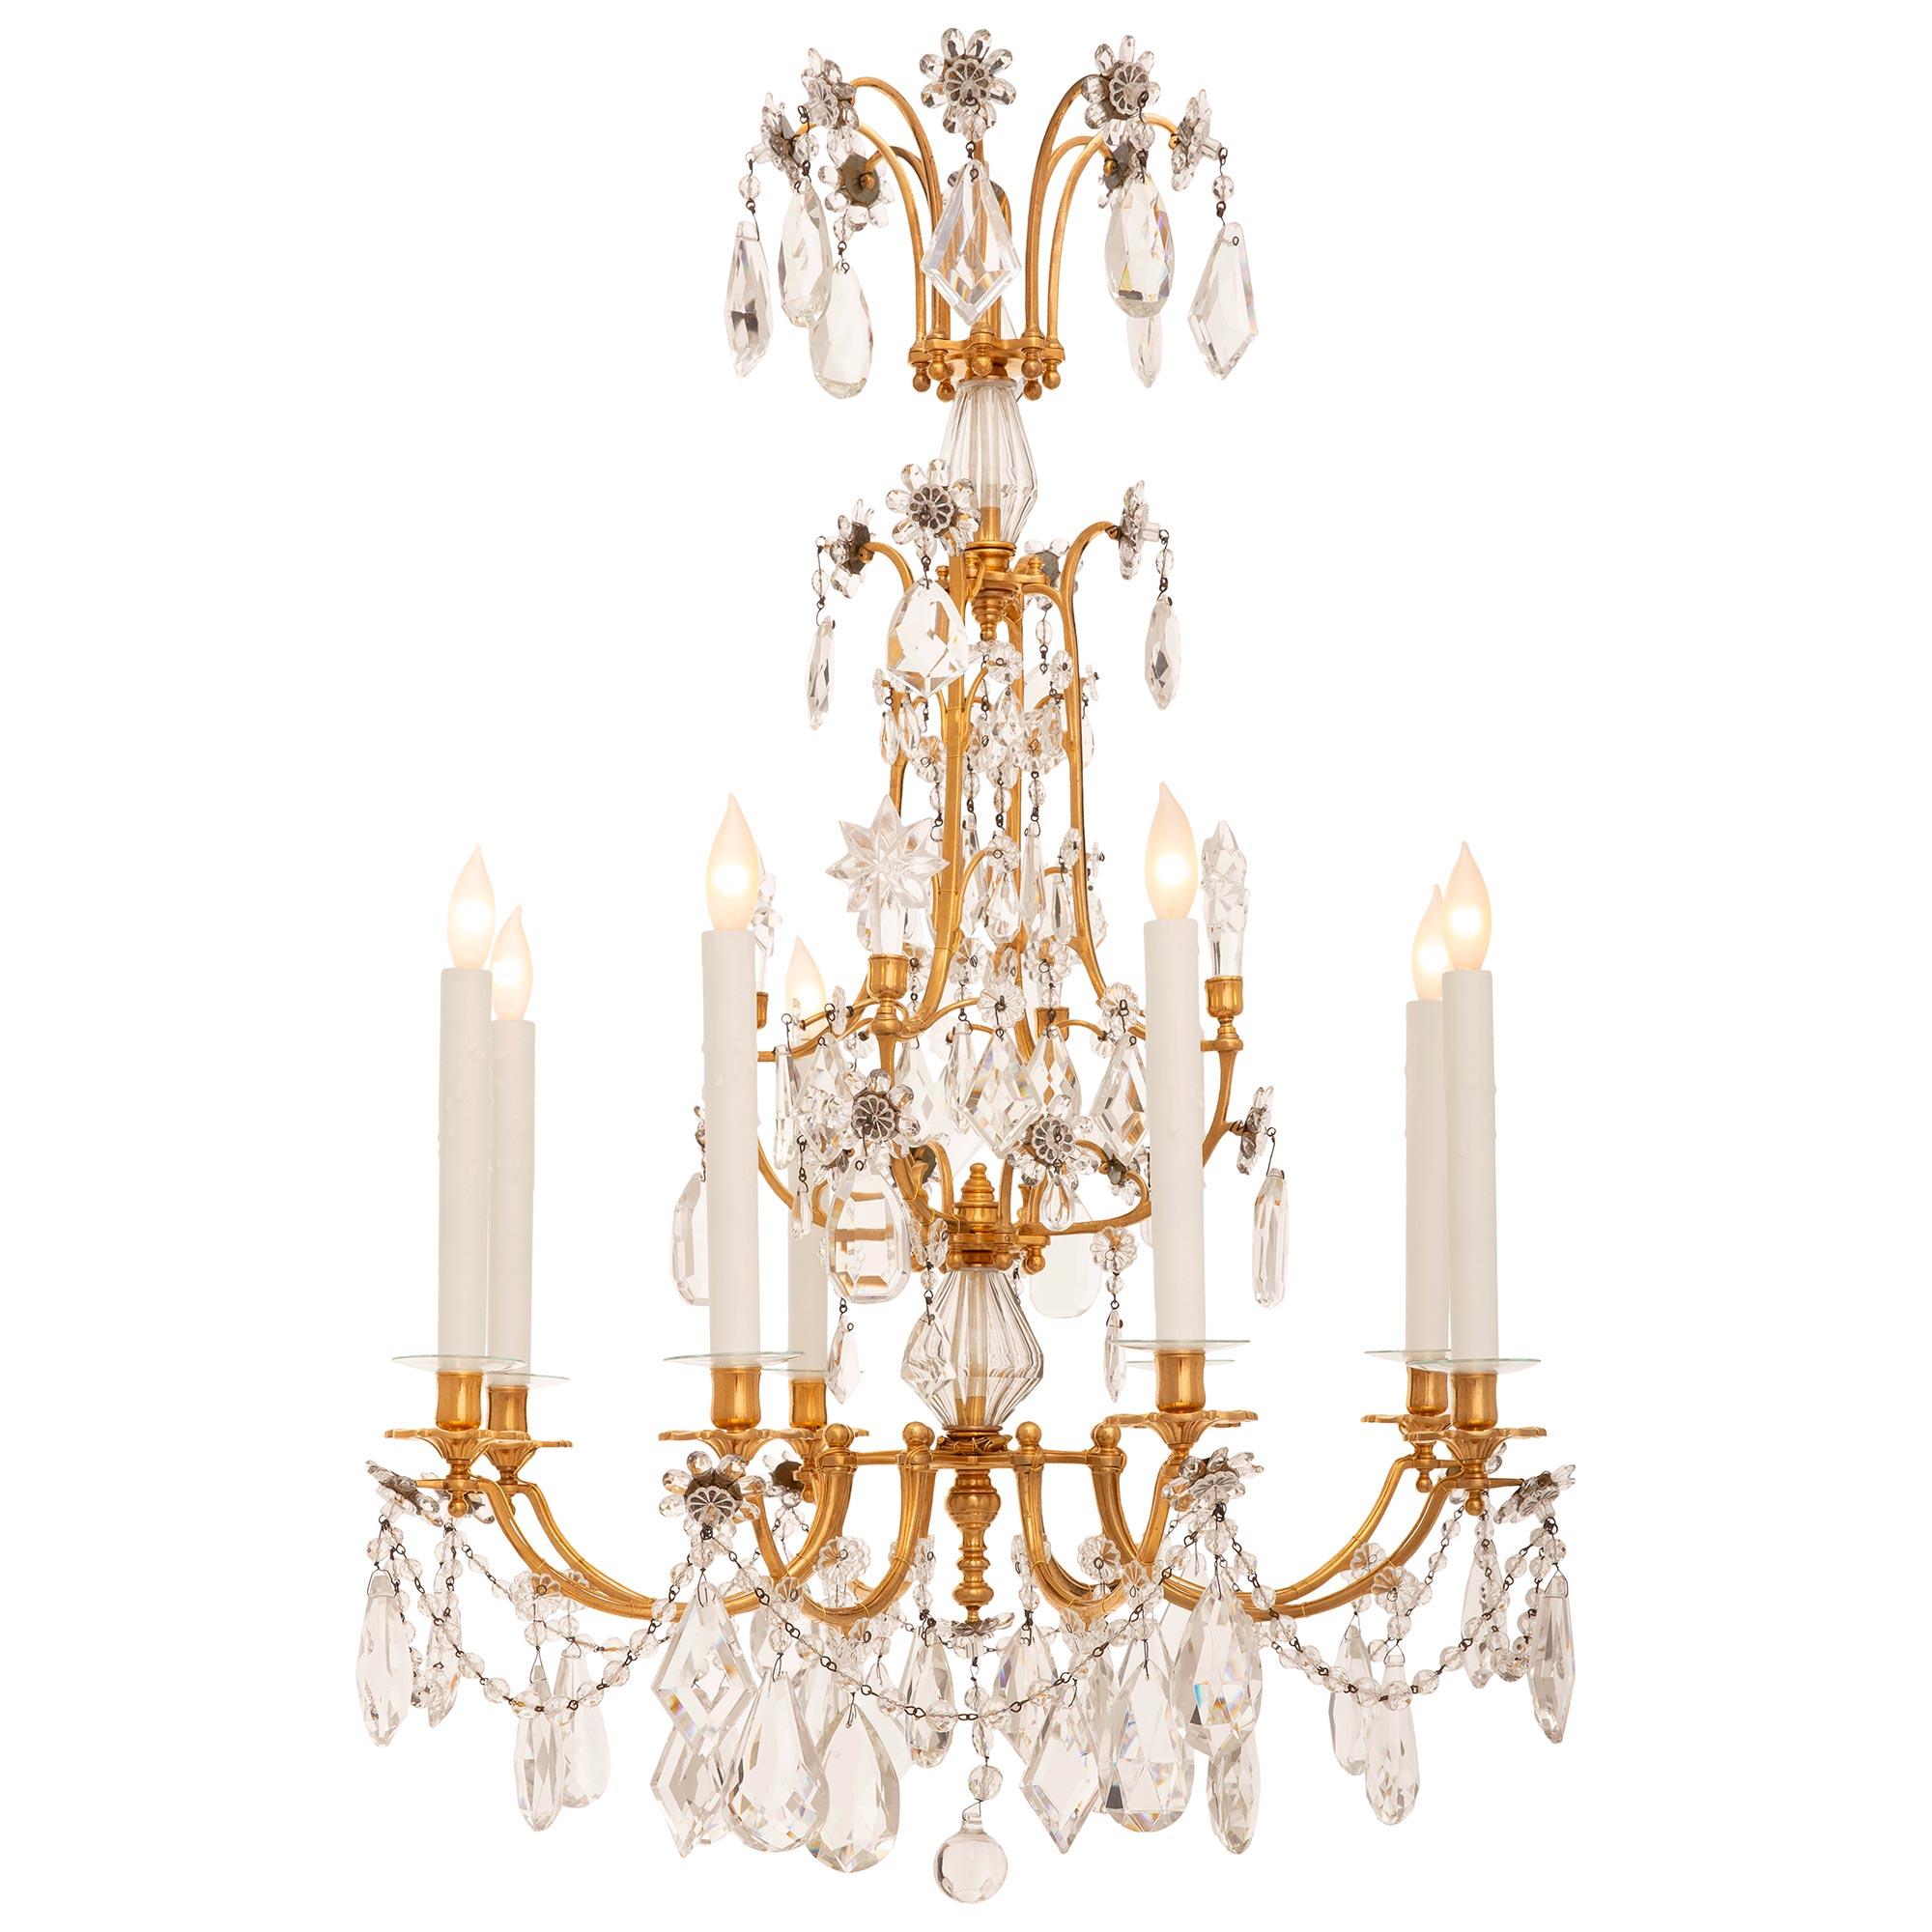 A stunning and high quality French 19th century Louis XVI st. Ormolu and Baccarat Crystal chandelier. This wonderful eight arm eight light chandelier is centered by a solid Crystal ball pendant which hangs with smaller faceted Crystal balls from a